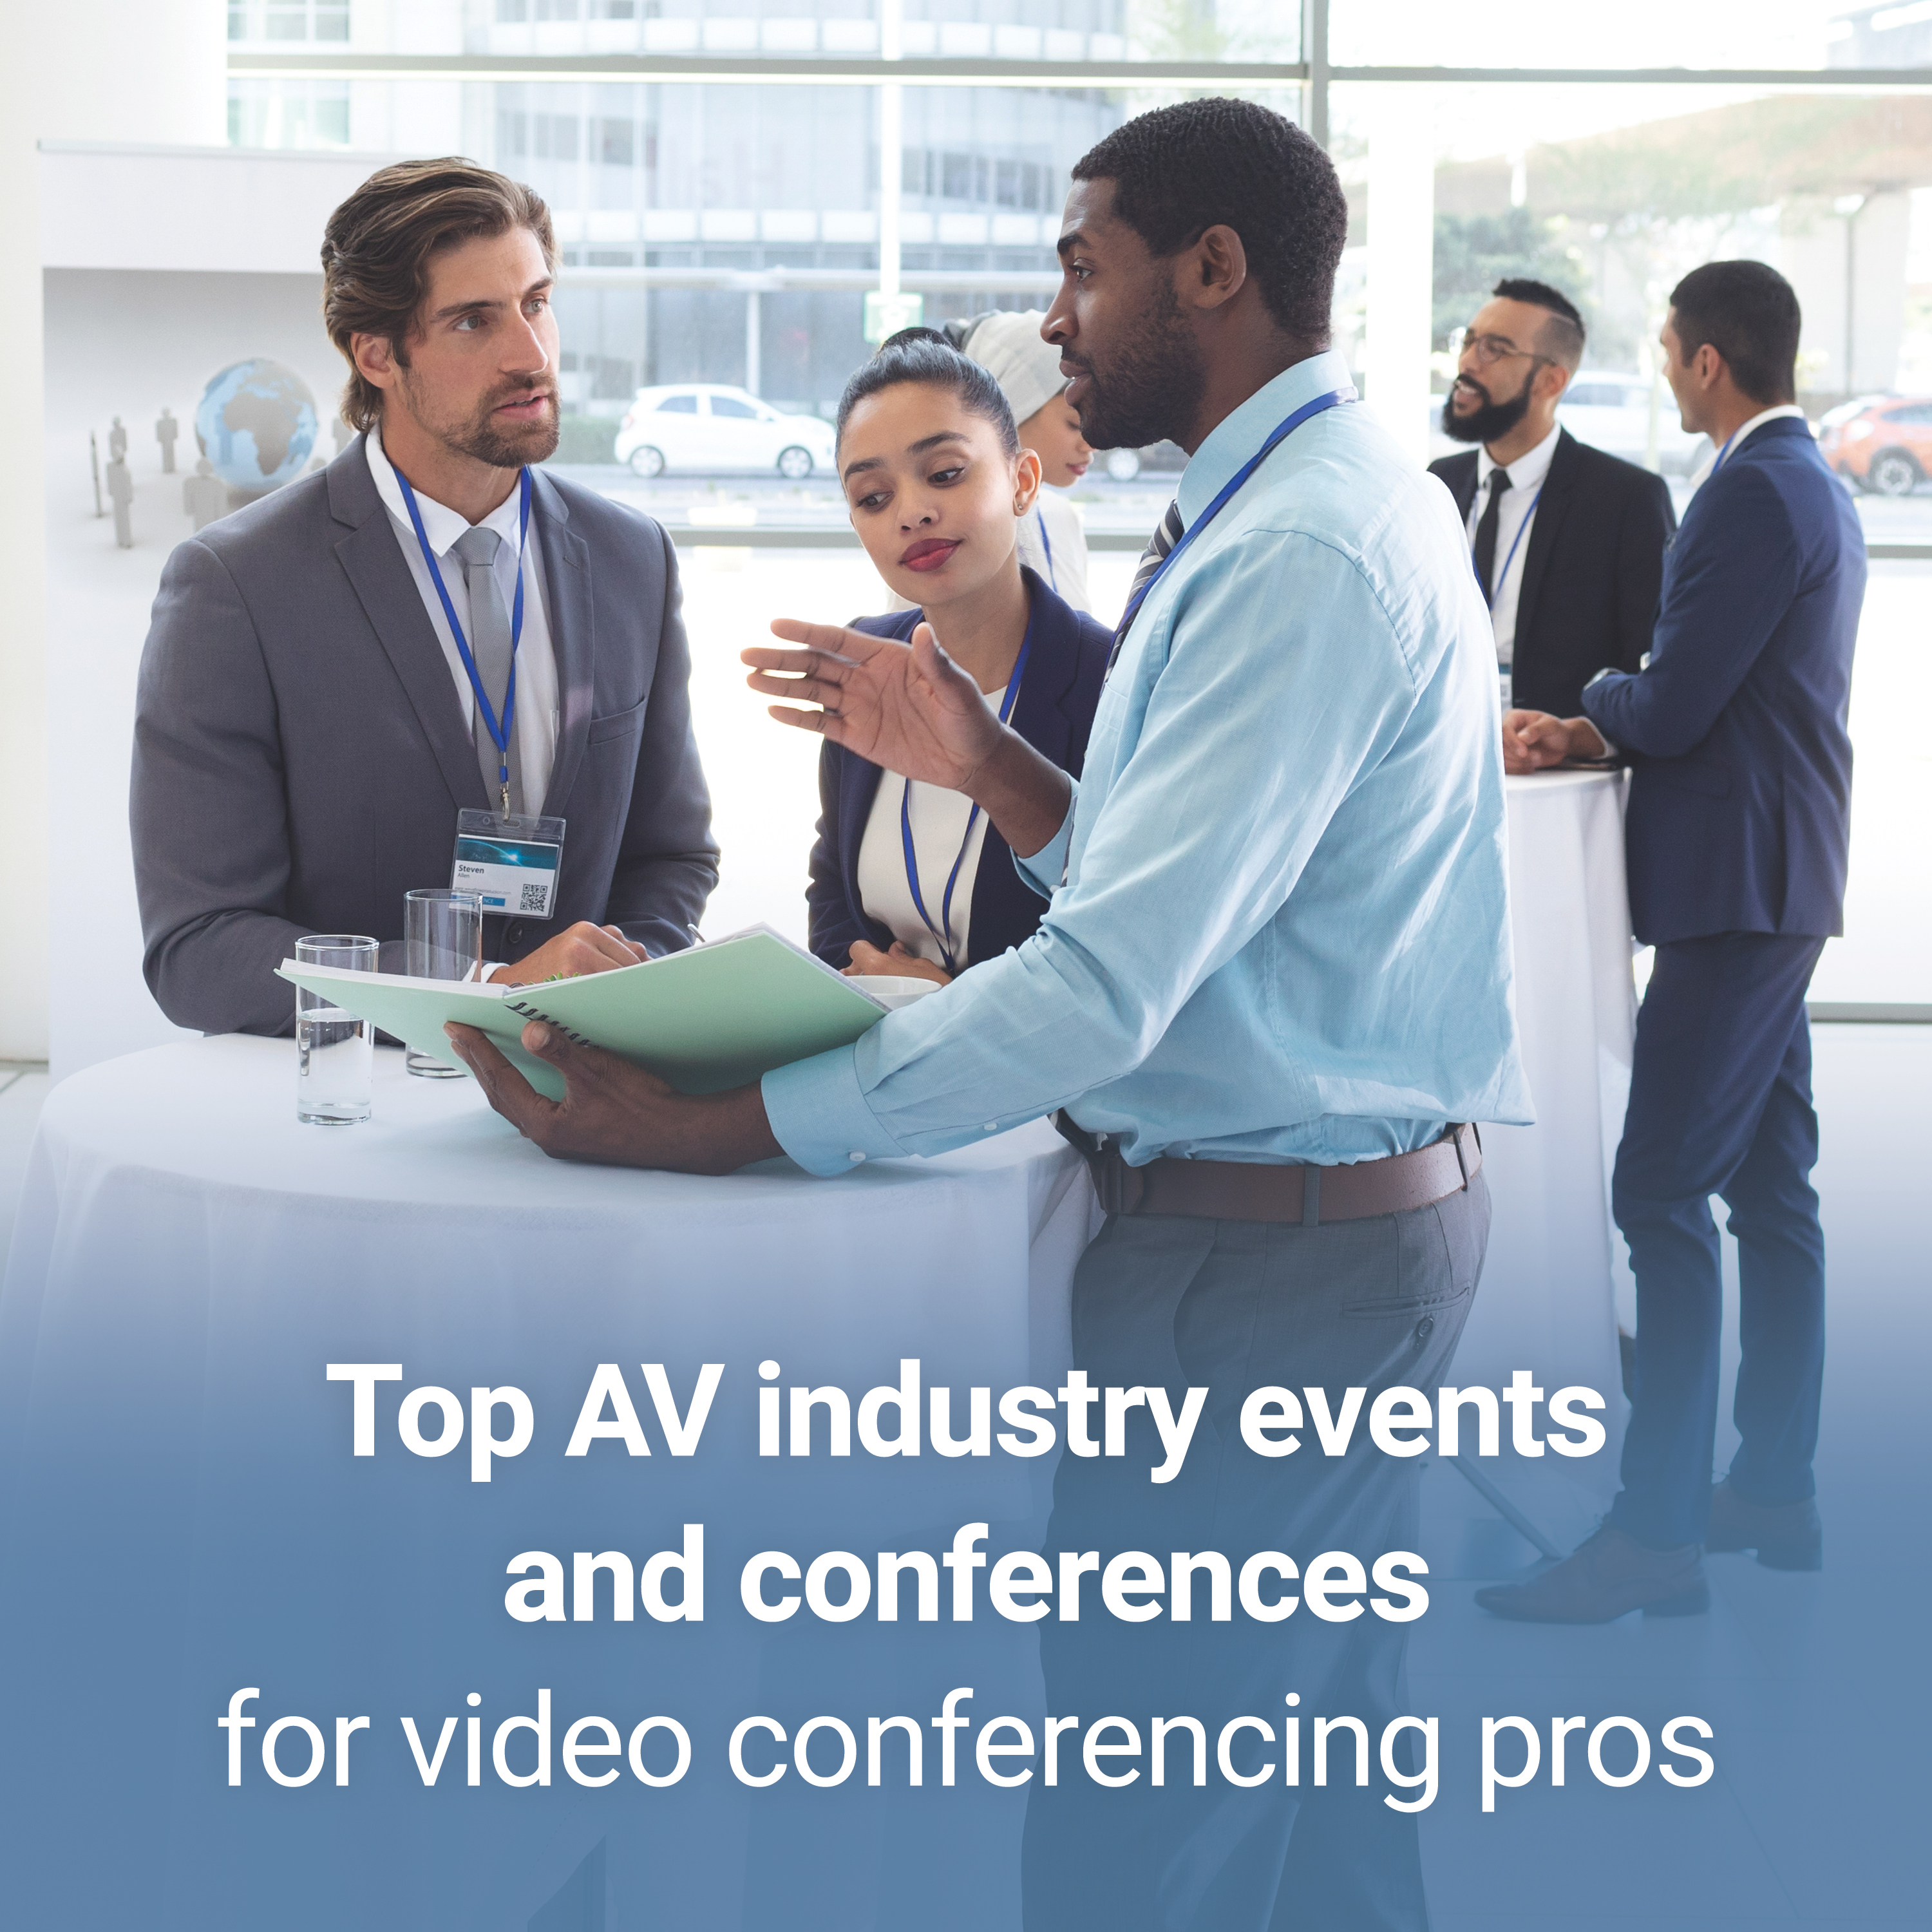 Top AV Industry Events and Conferences for Video Conferencing Pros